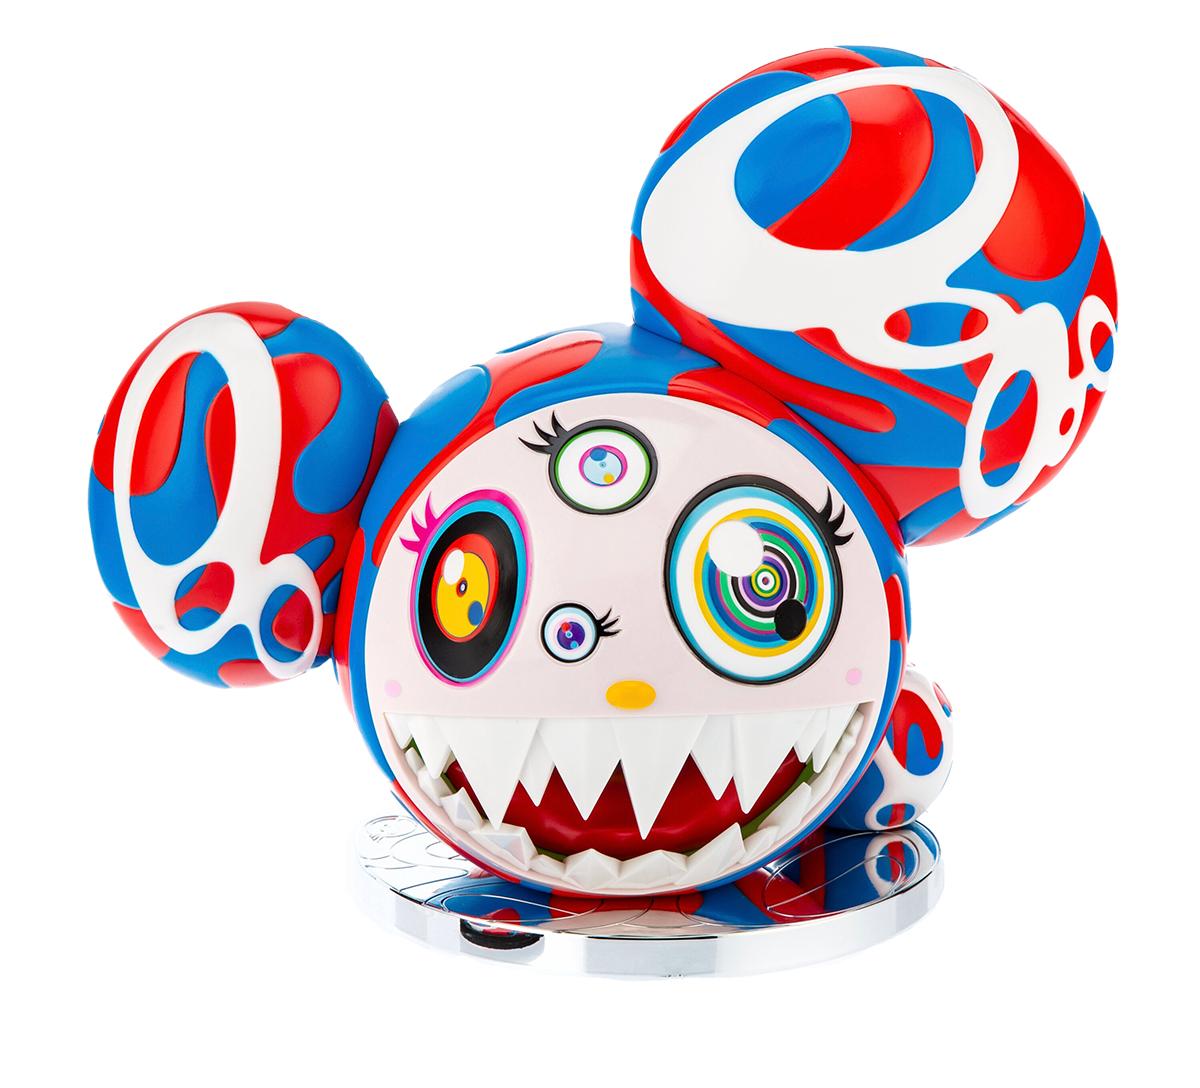 Takashi Murakami Melting DOB, 2021:
Takashi Murakami's signature DOB figure new/unopened in its original packaging. A standout Murakami limited edition collector's piece, rarely presented new/sealed in its original factory box. 

Medium: Painted